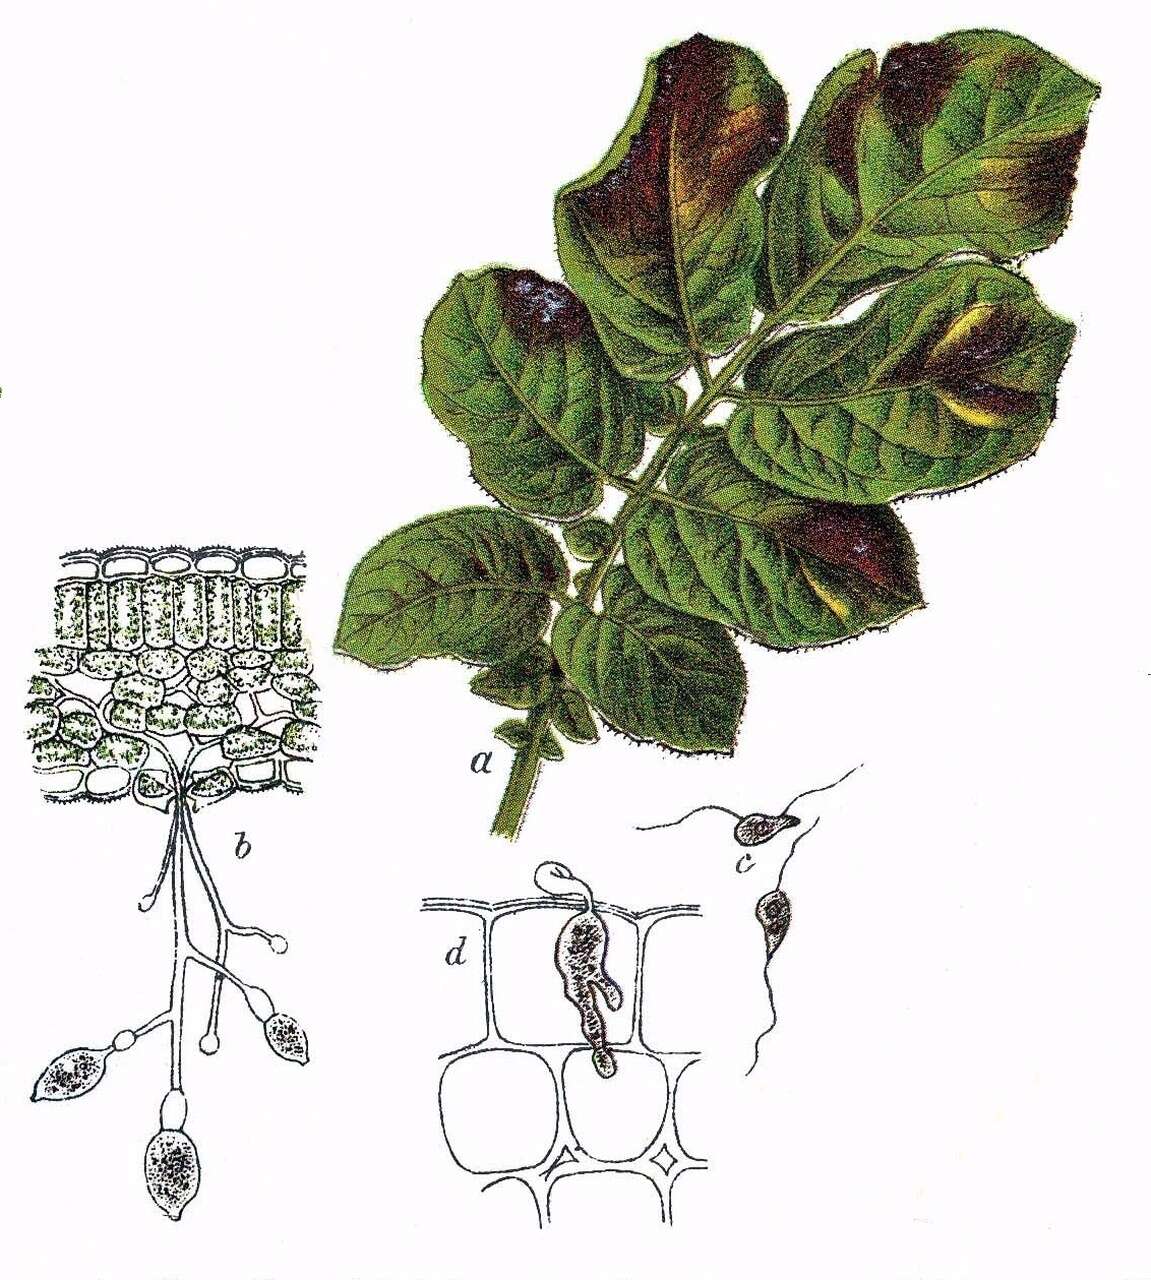 Image of Phytophthora de Bary 1876